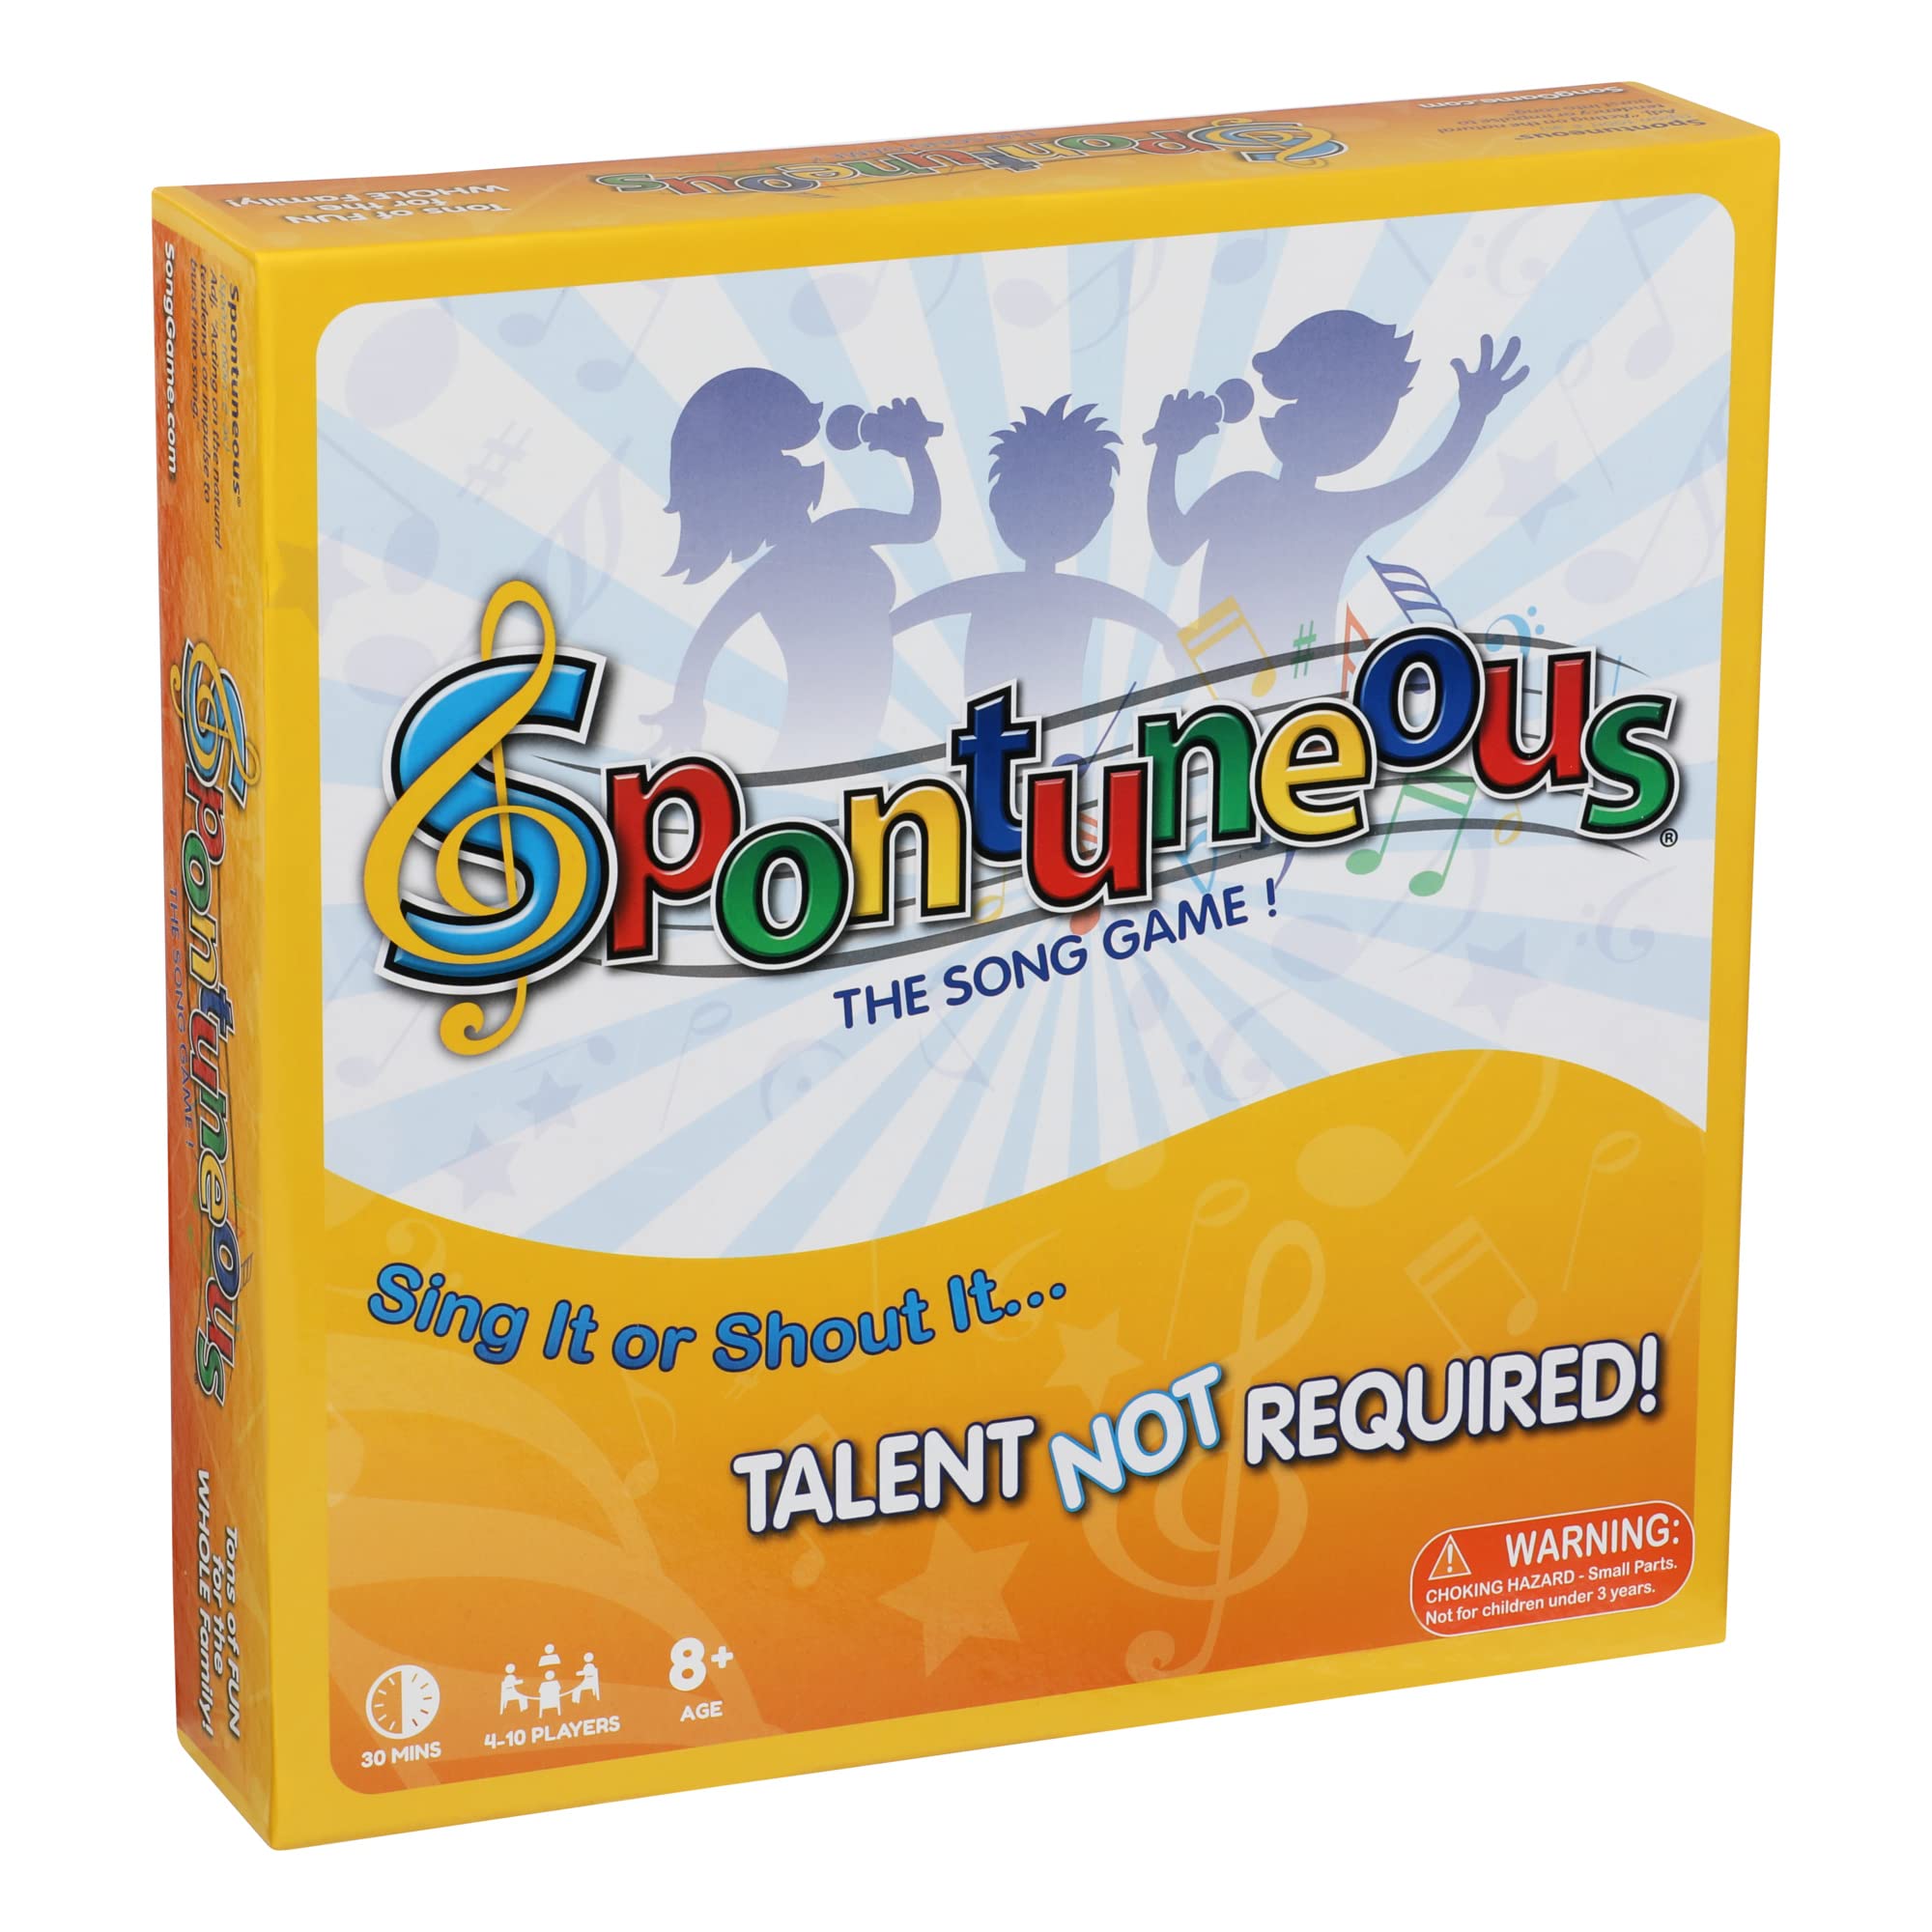 Spontuneous The Song Game Sing It or Shout It Family Party Board Game $12.27 + Free Shipping w/ Prime or on $35+